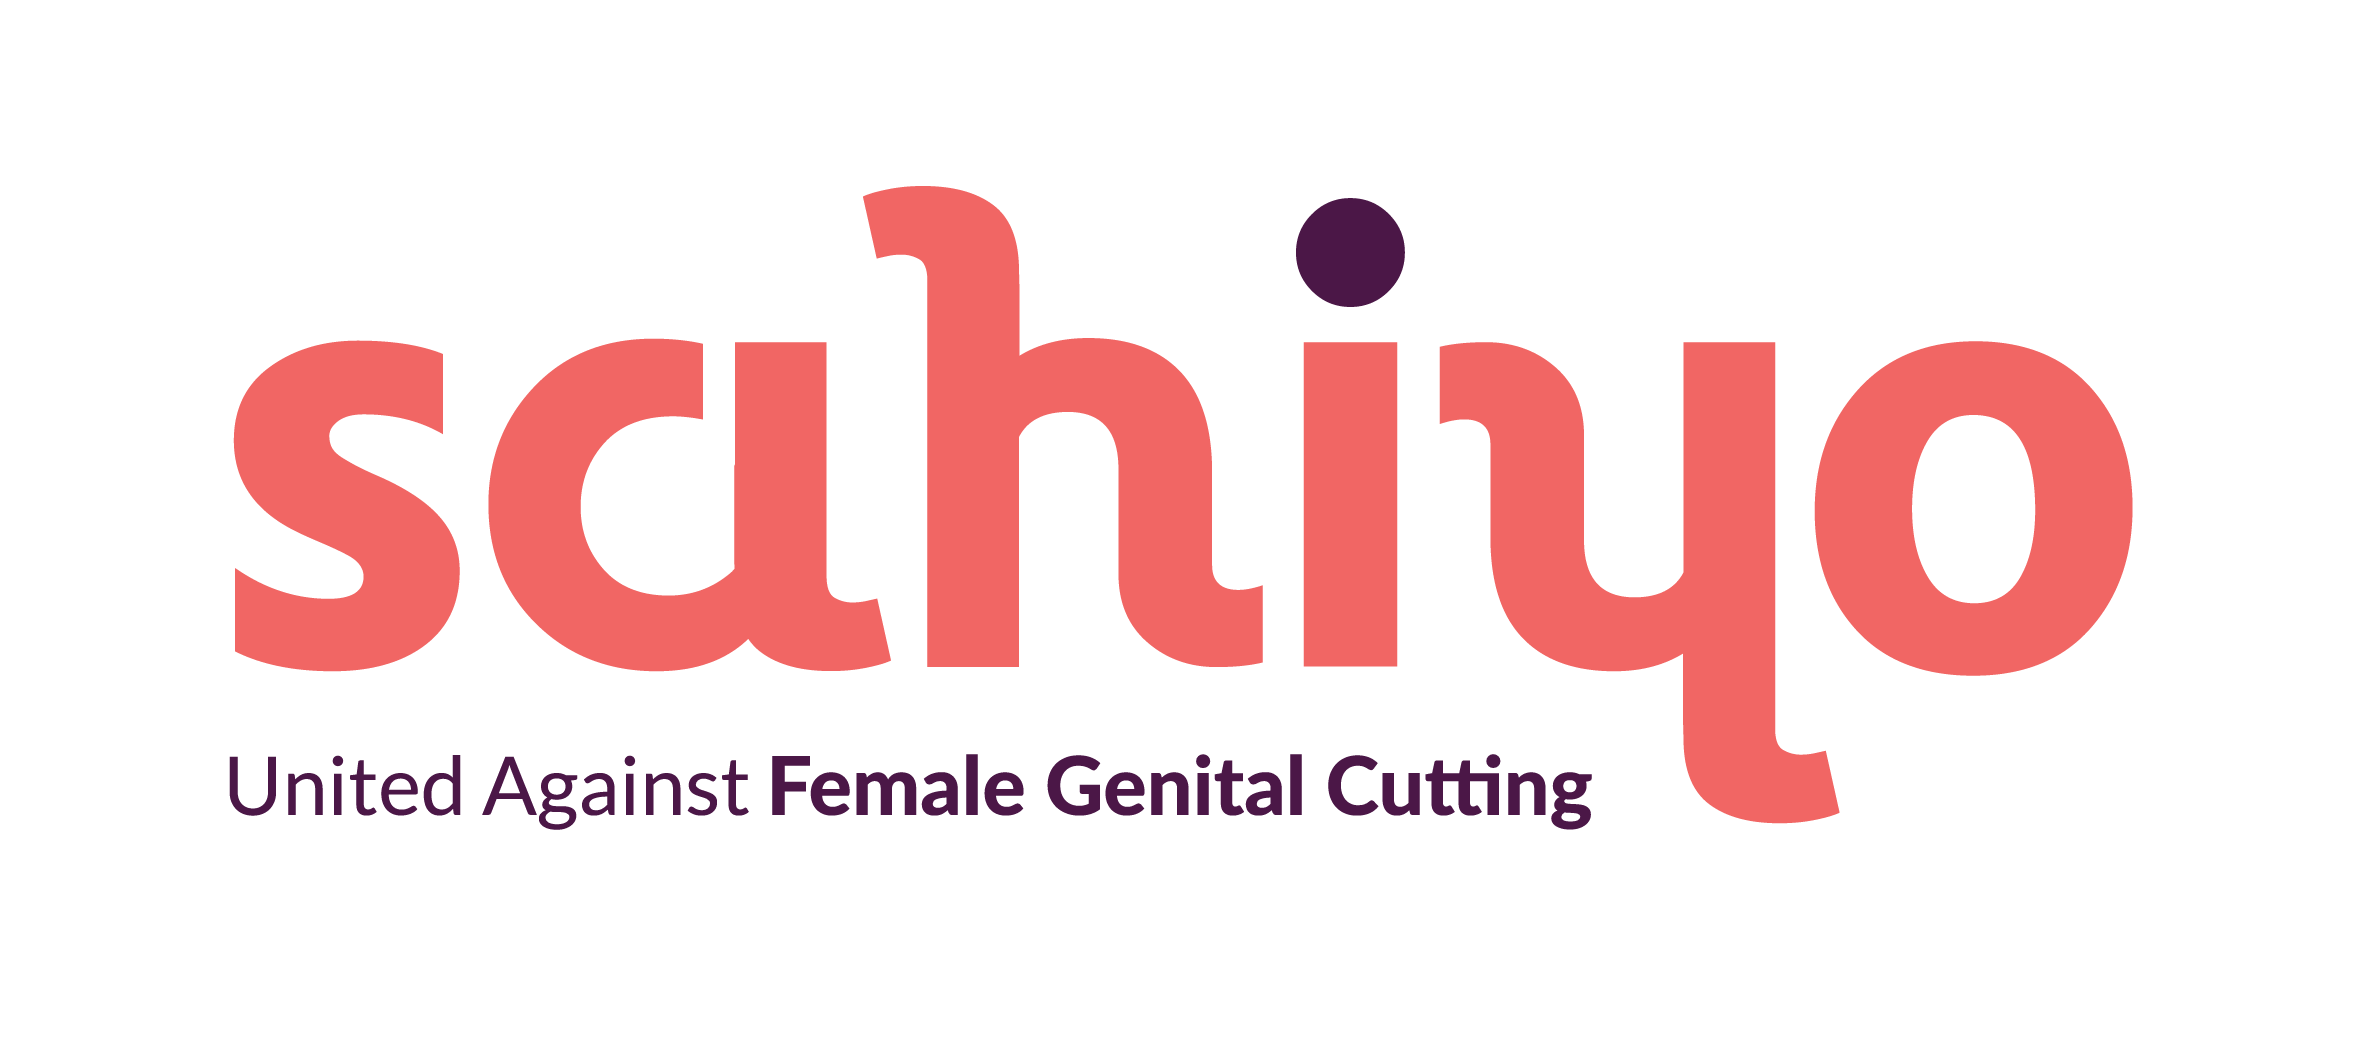 Want to help us end female genital cutting? Vote for Sahiyo in the Shared Nation Contest!